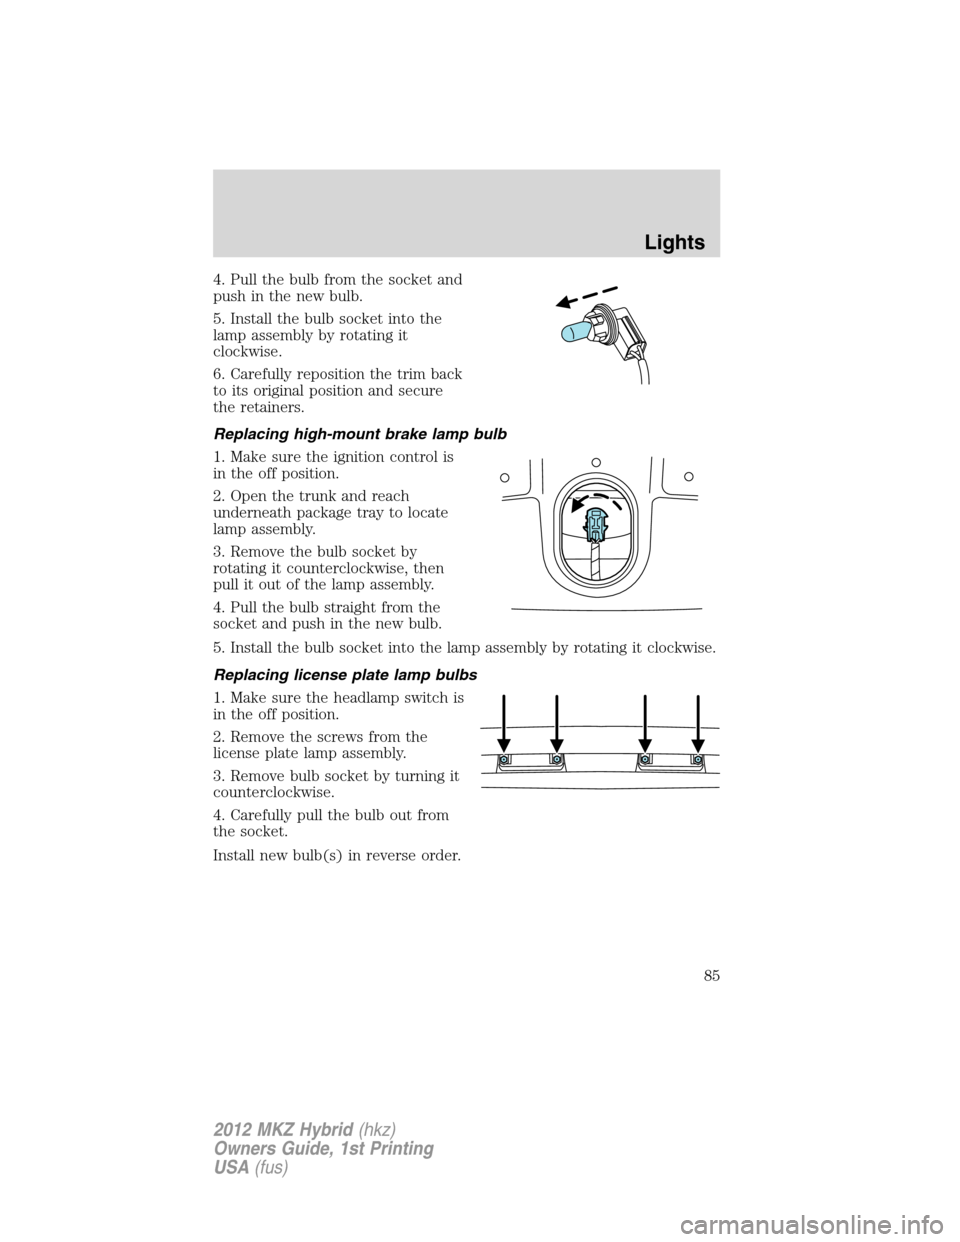 LINCOLN MKZ HYBRID 2012 User Guide 4. Pull the bulb from the socket and
push in the new bulb.
5. Install the bulb socket into the
lamp assembly by rotating it
clockwise.
6. Carefully reposition the trim back
to its original position an